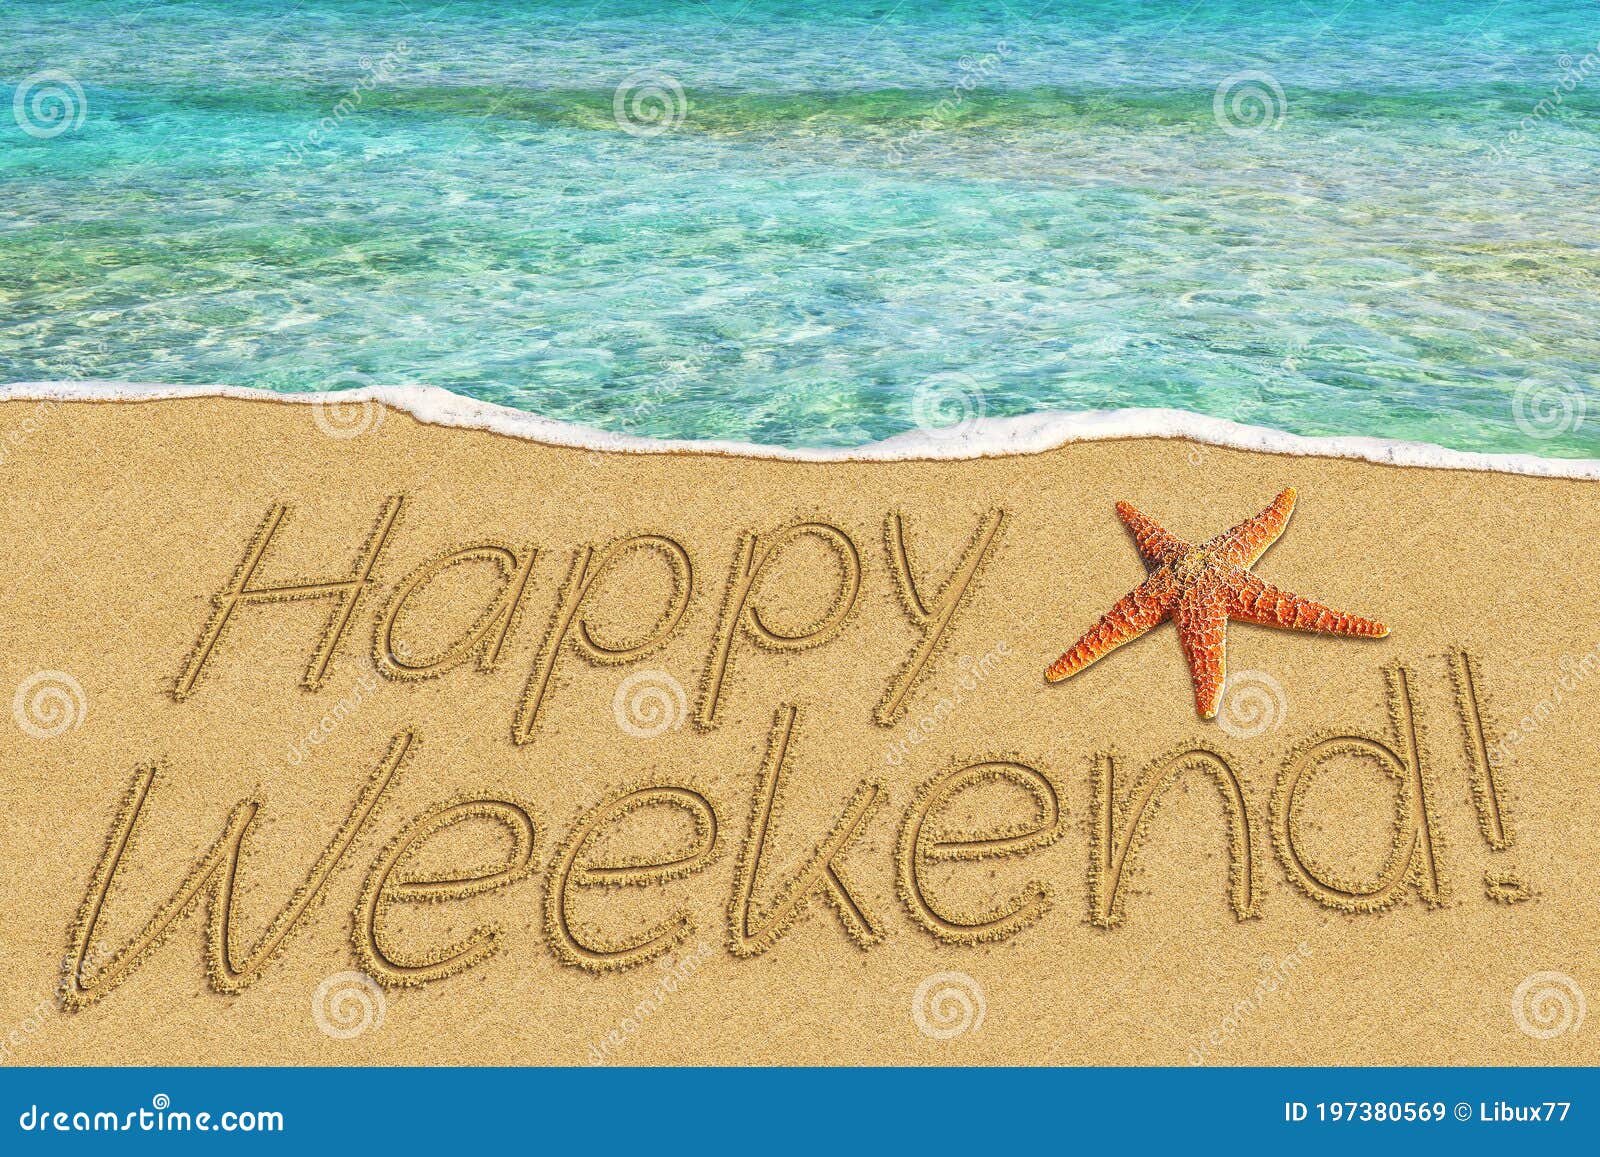 Happy Weekend Sign on Sand and Starfish Stock Image - Image of ...